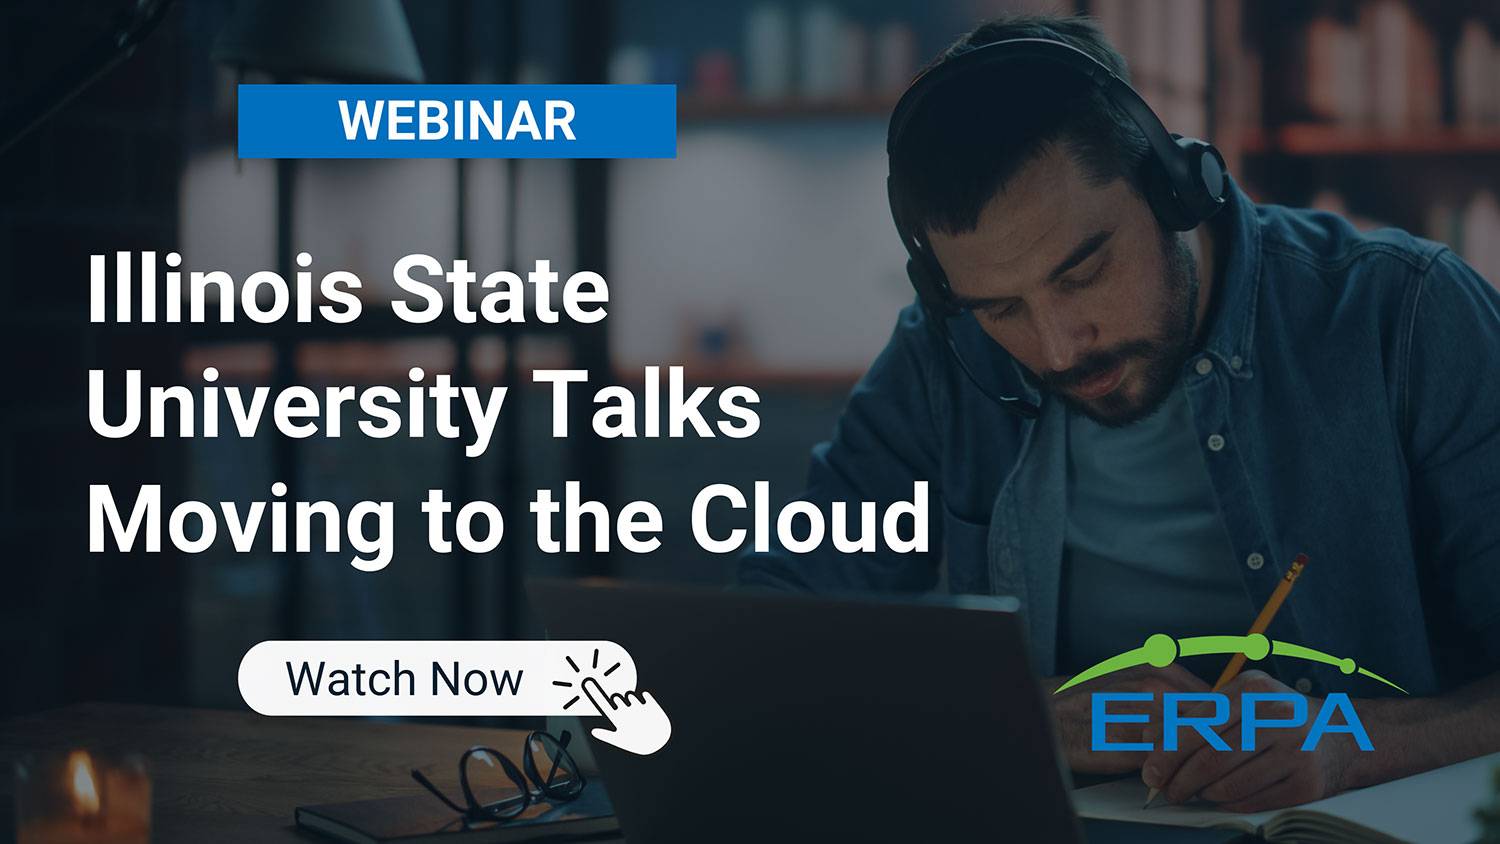 ERPA Webinar: Illinois State University Talks Moving to the Cloud